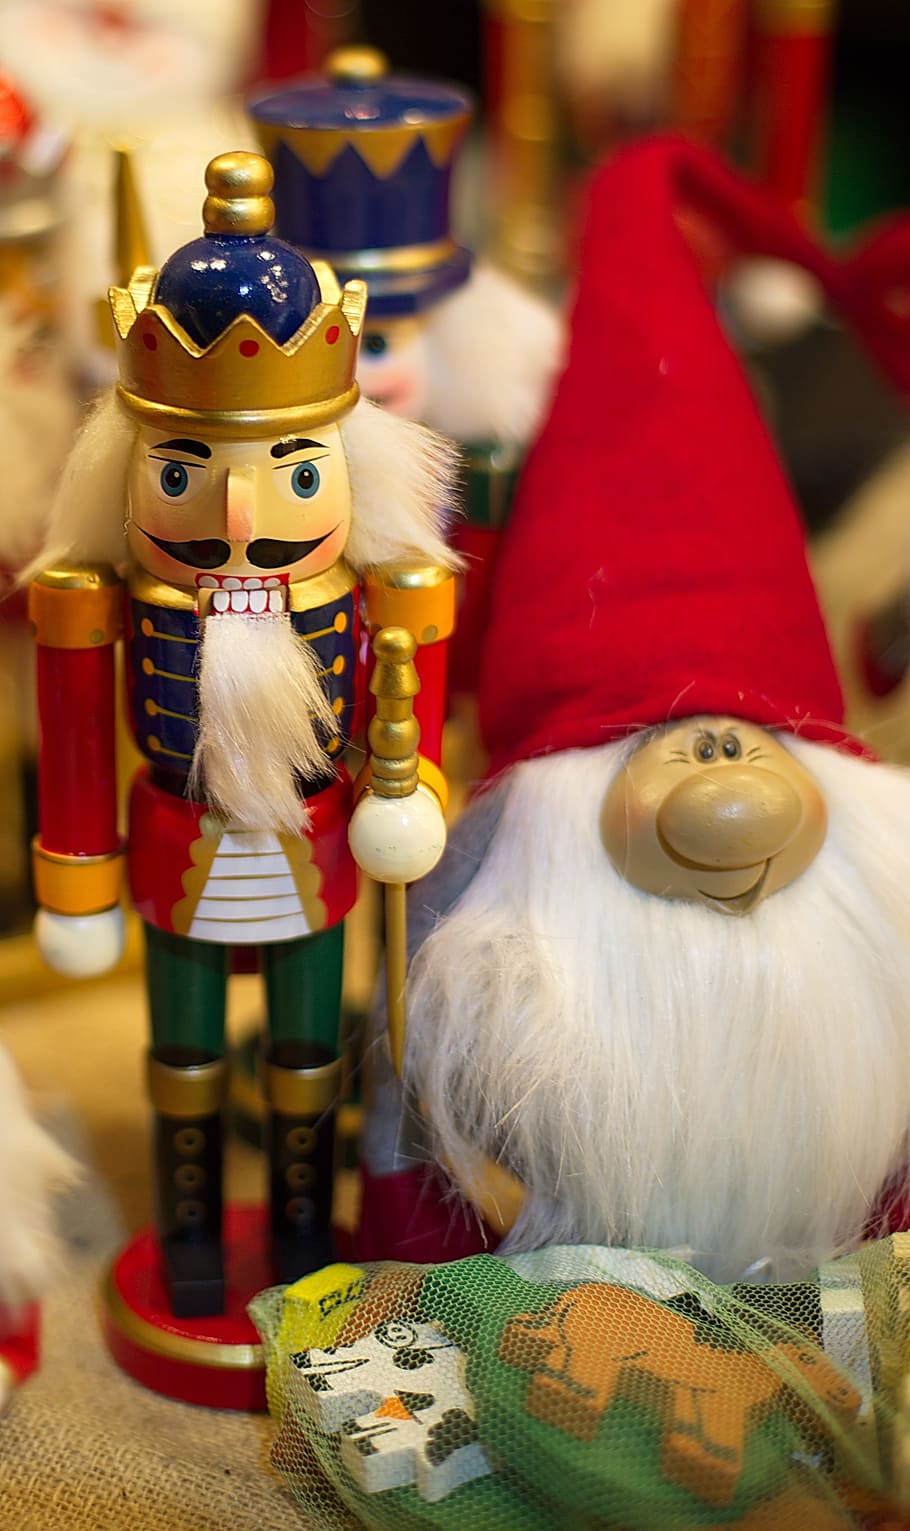 Nutcracker, Wood, Figure, Christmas, christmas market, ore mountains, decoration, craft, tooth, toy